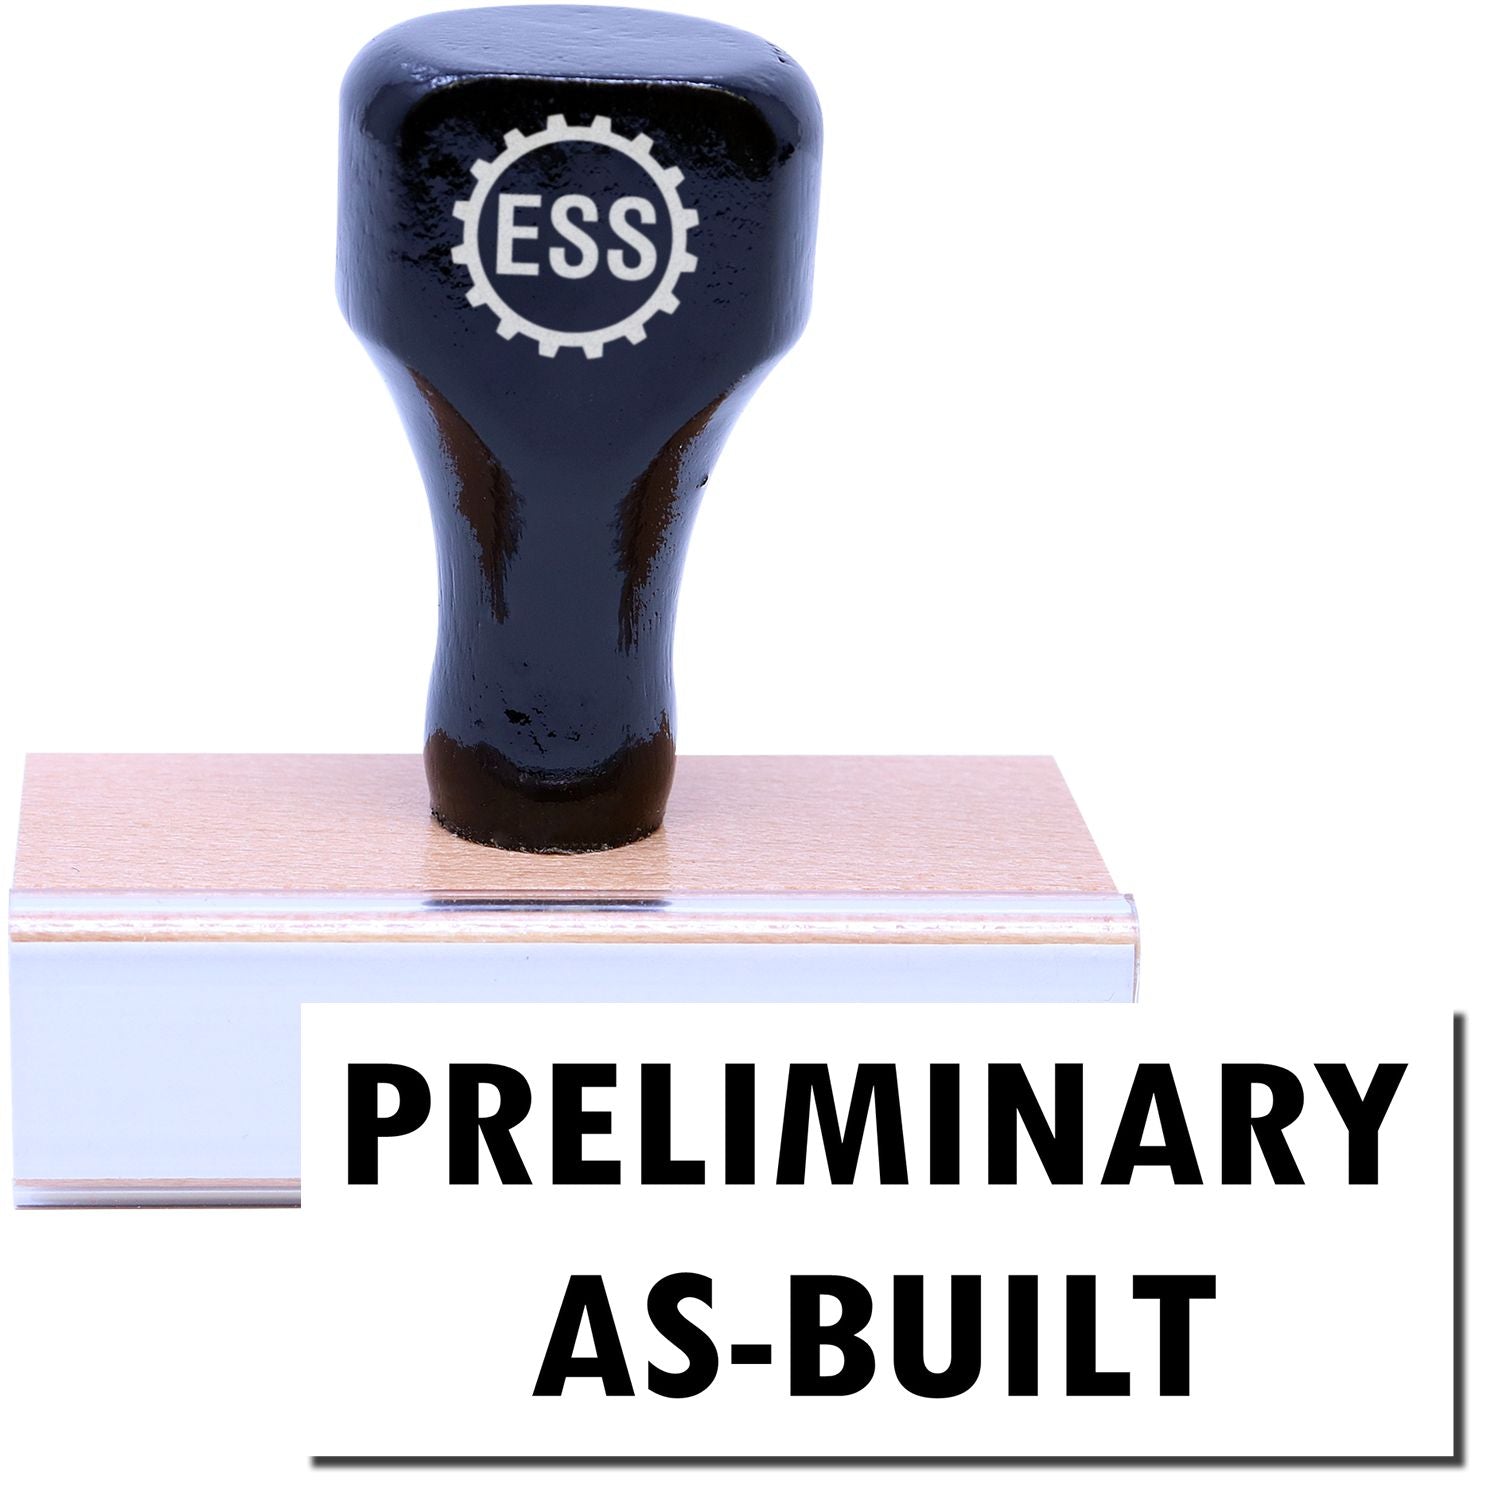 A stock office rubber stamp with a stamped image showing how the text "PRELIMINARY AS-BUILT" is displayed after stamping.